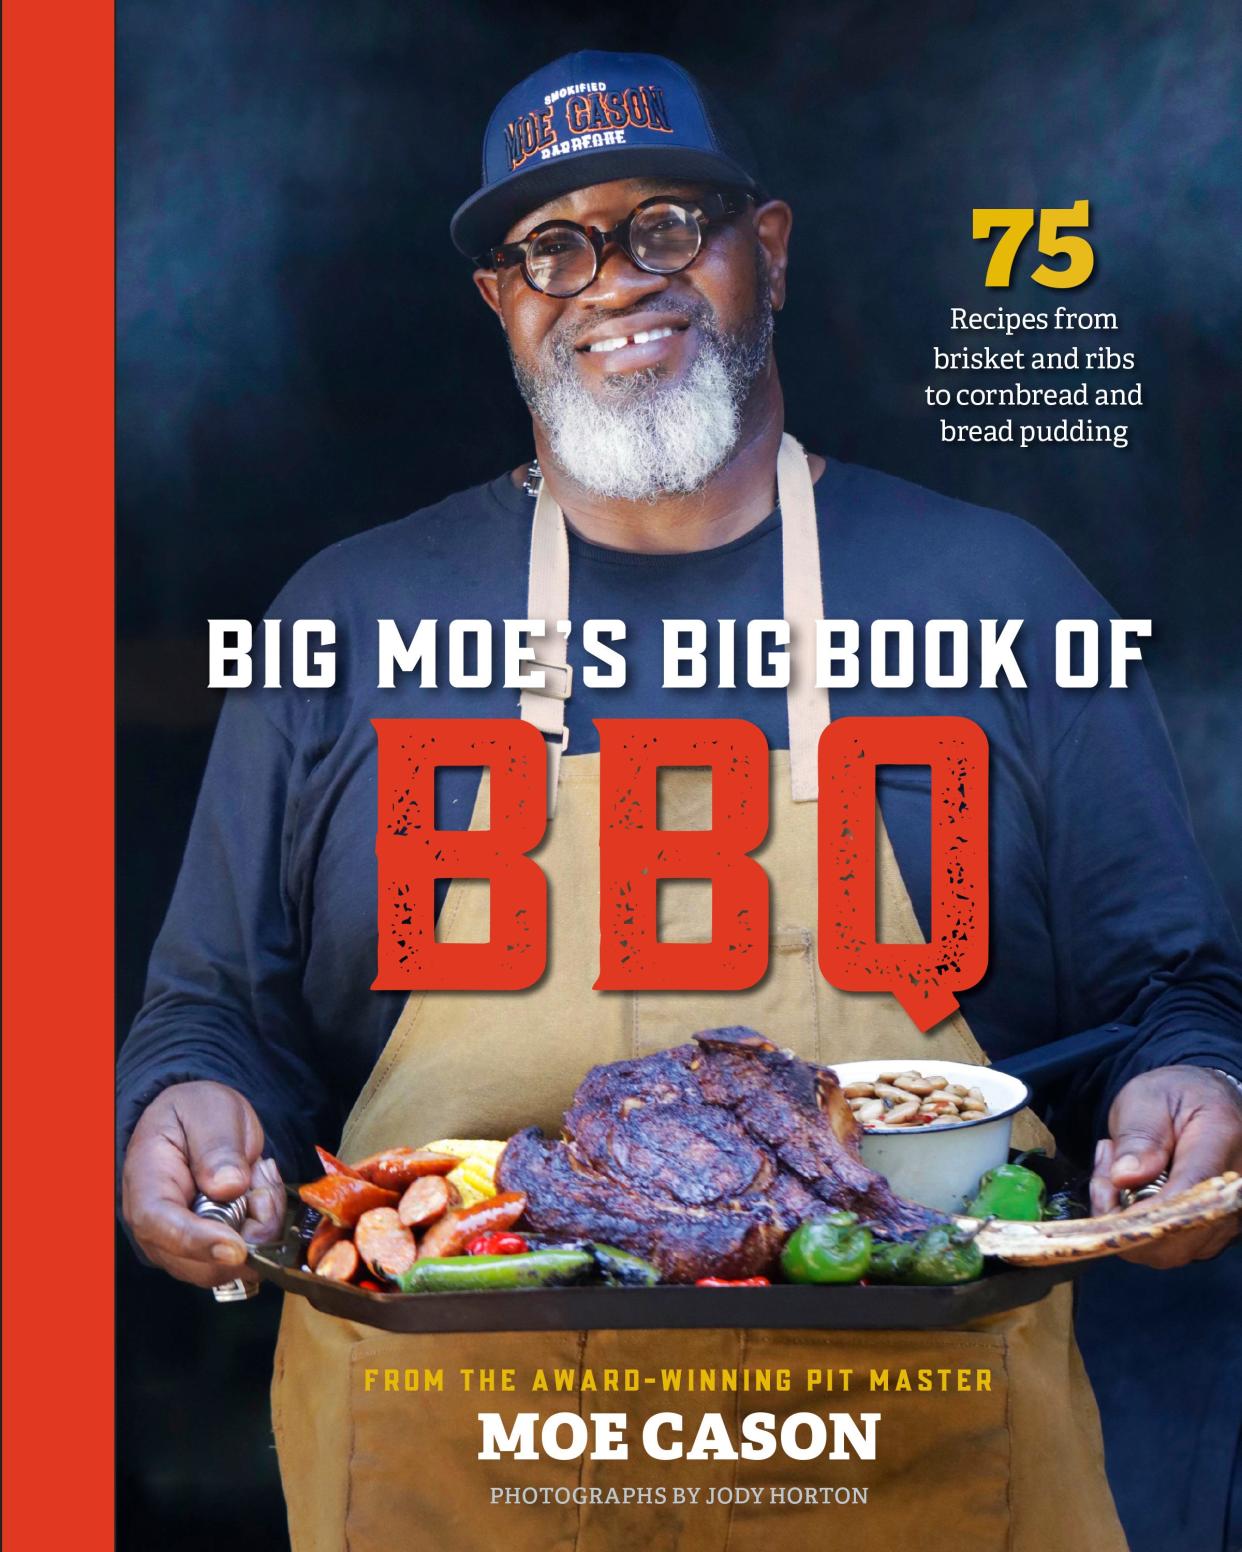 "Big Moe's Big Book of BBQ" comes out on May 7 by Moe Cason.